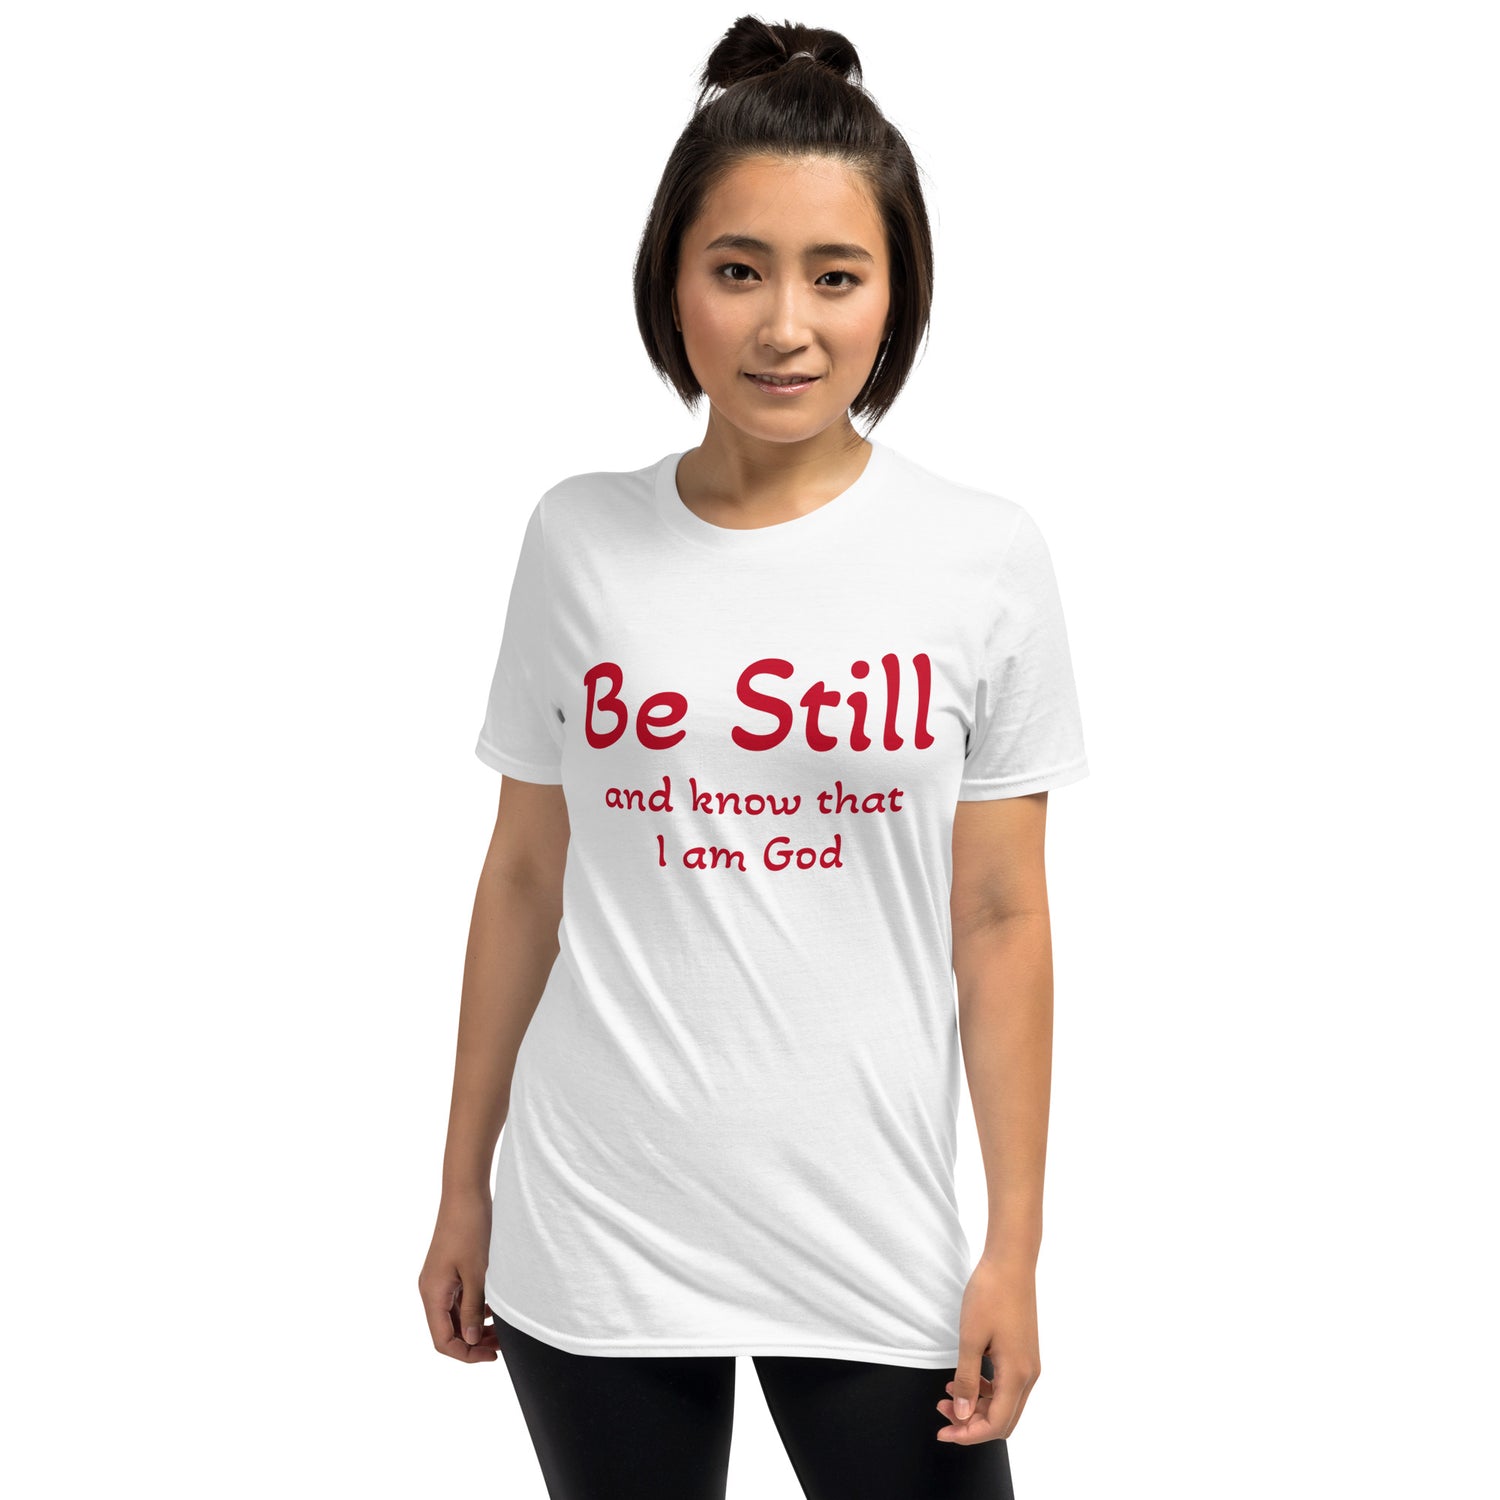 Unisex soft-style White T-shirt with Be Still and Know that I am God in Red letters